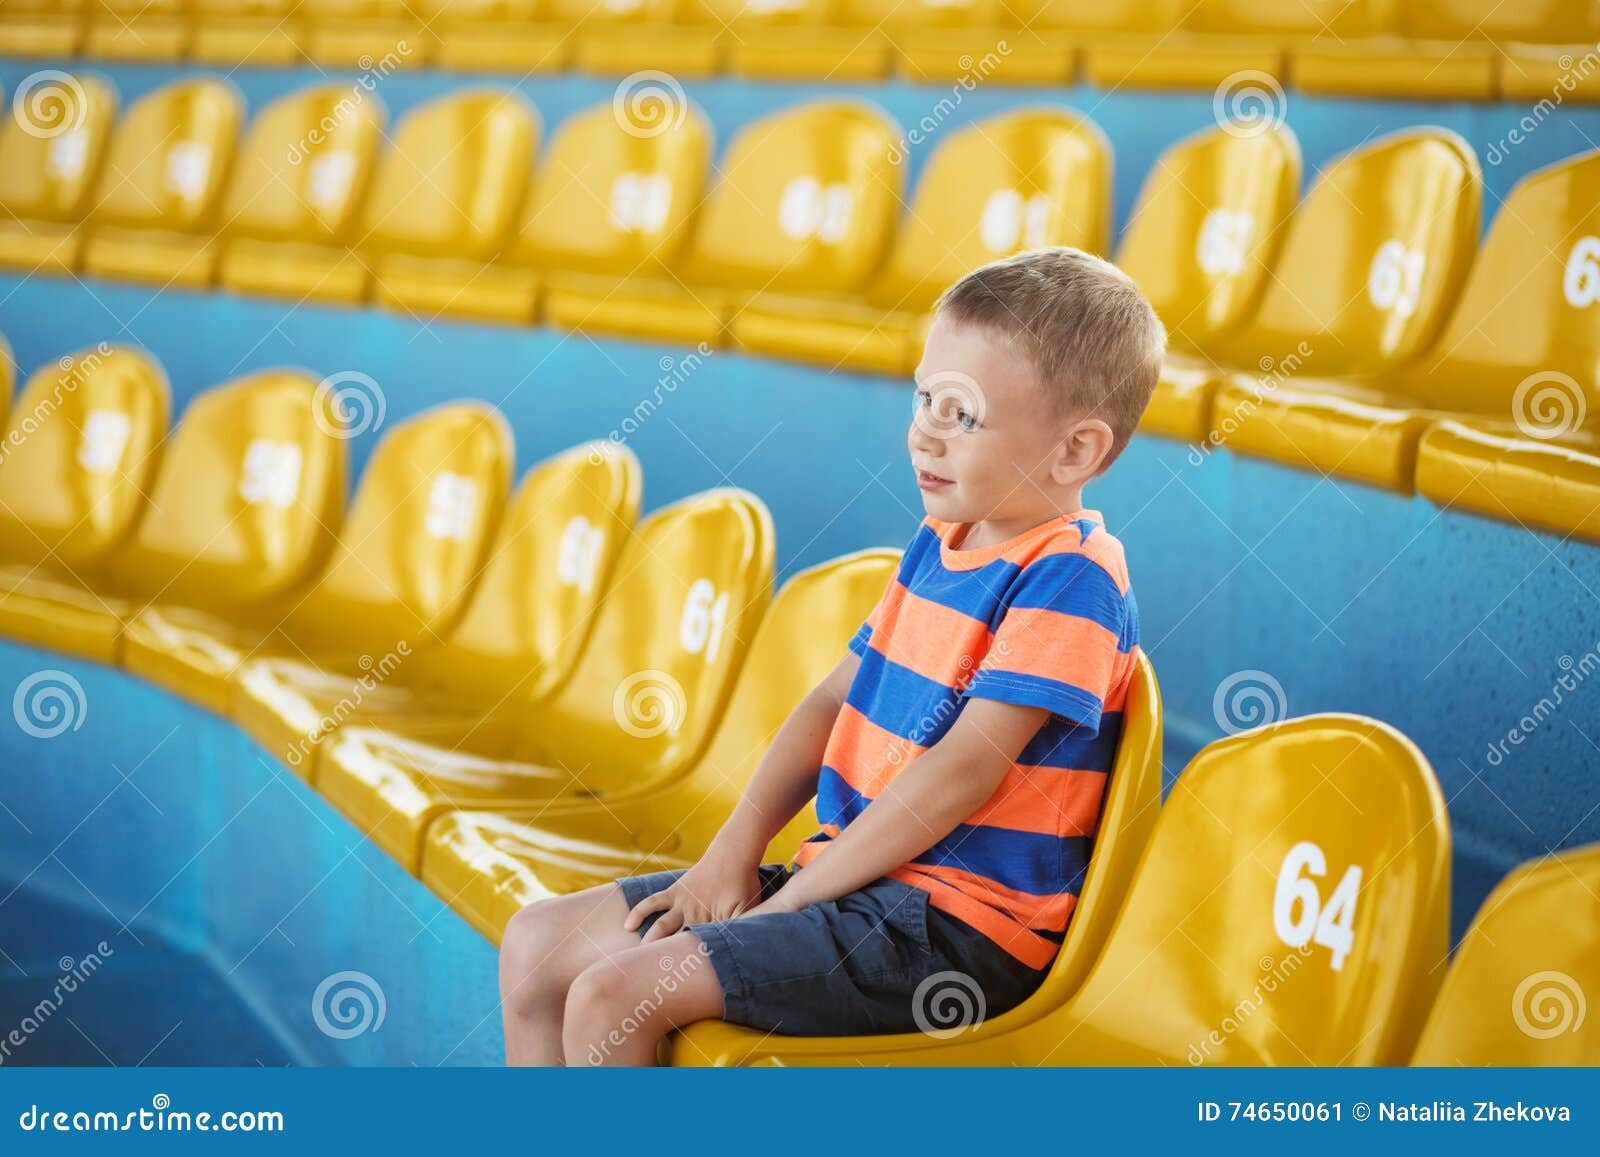 child take own seat in the stadium or dolphinarium and waiting p